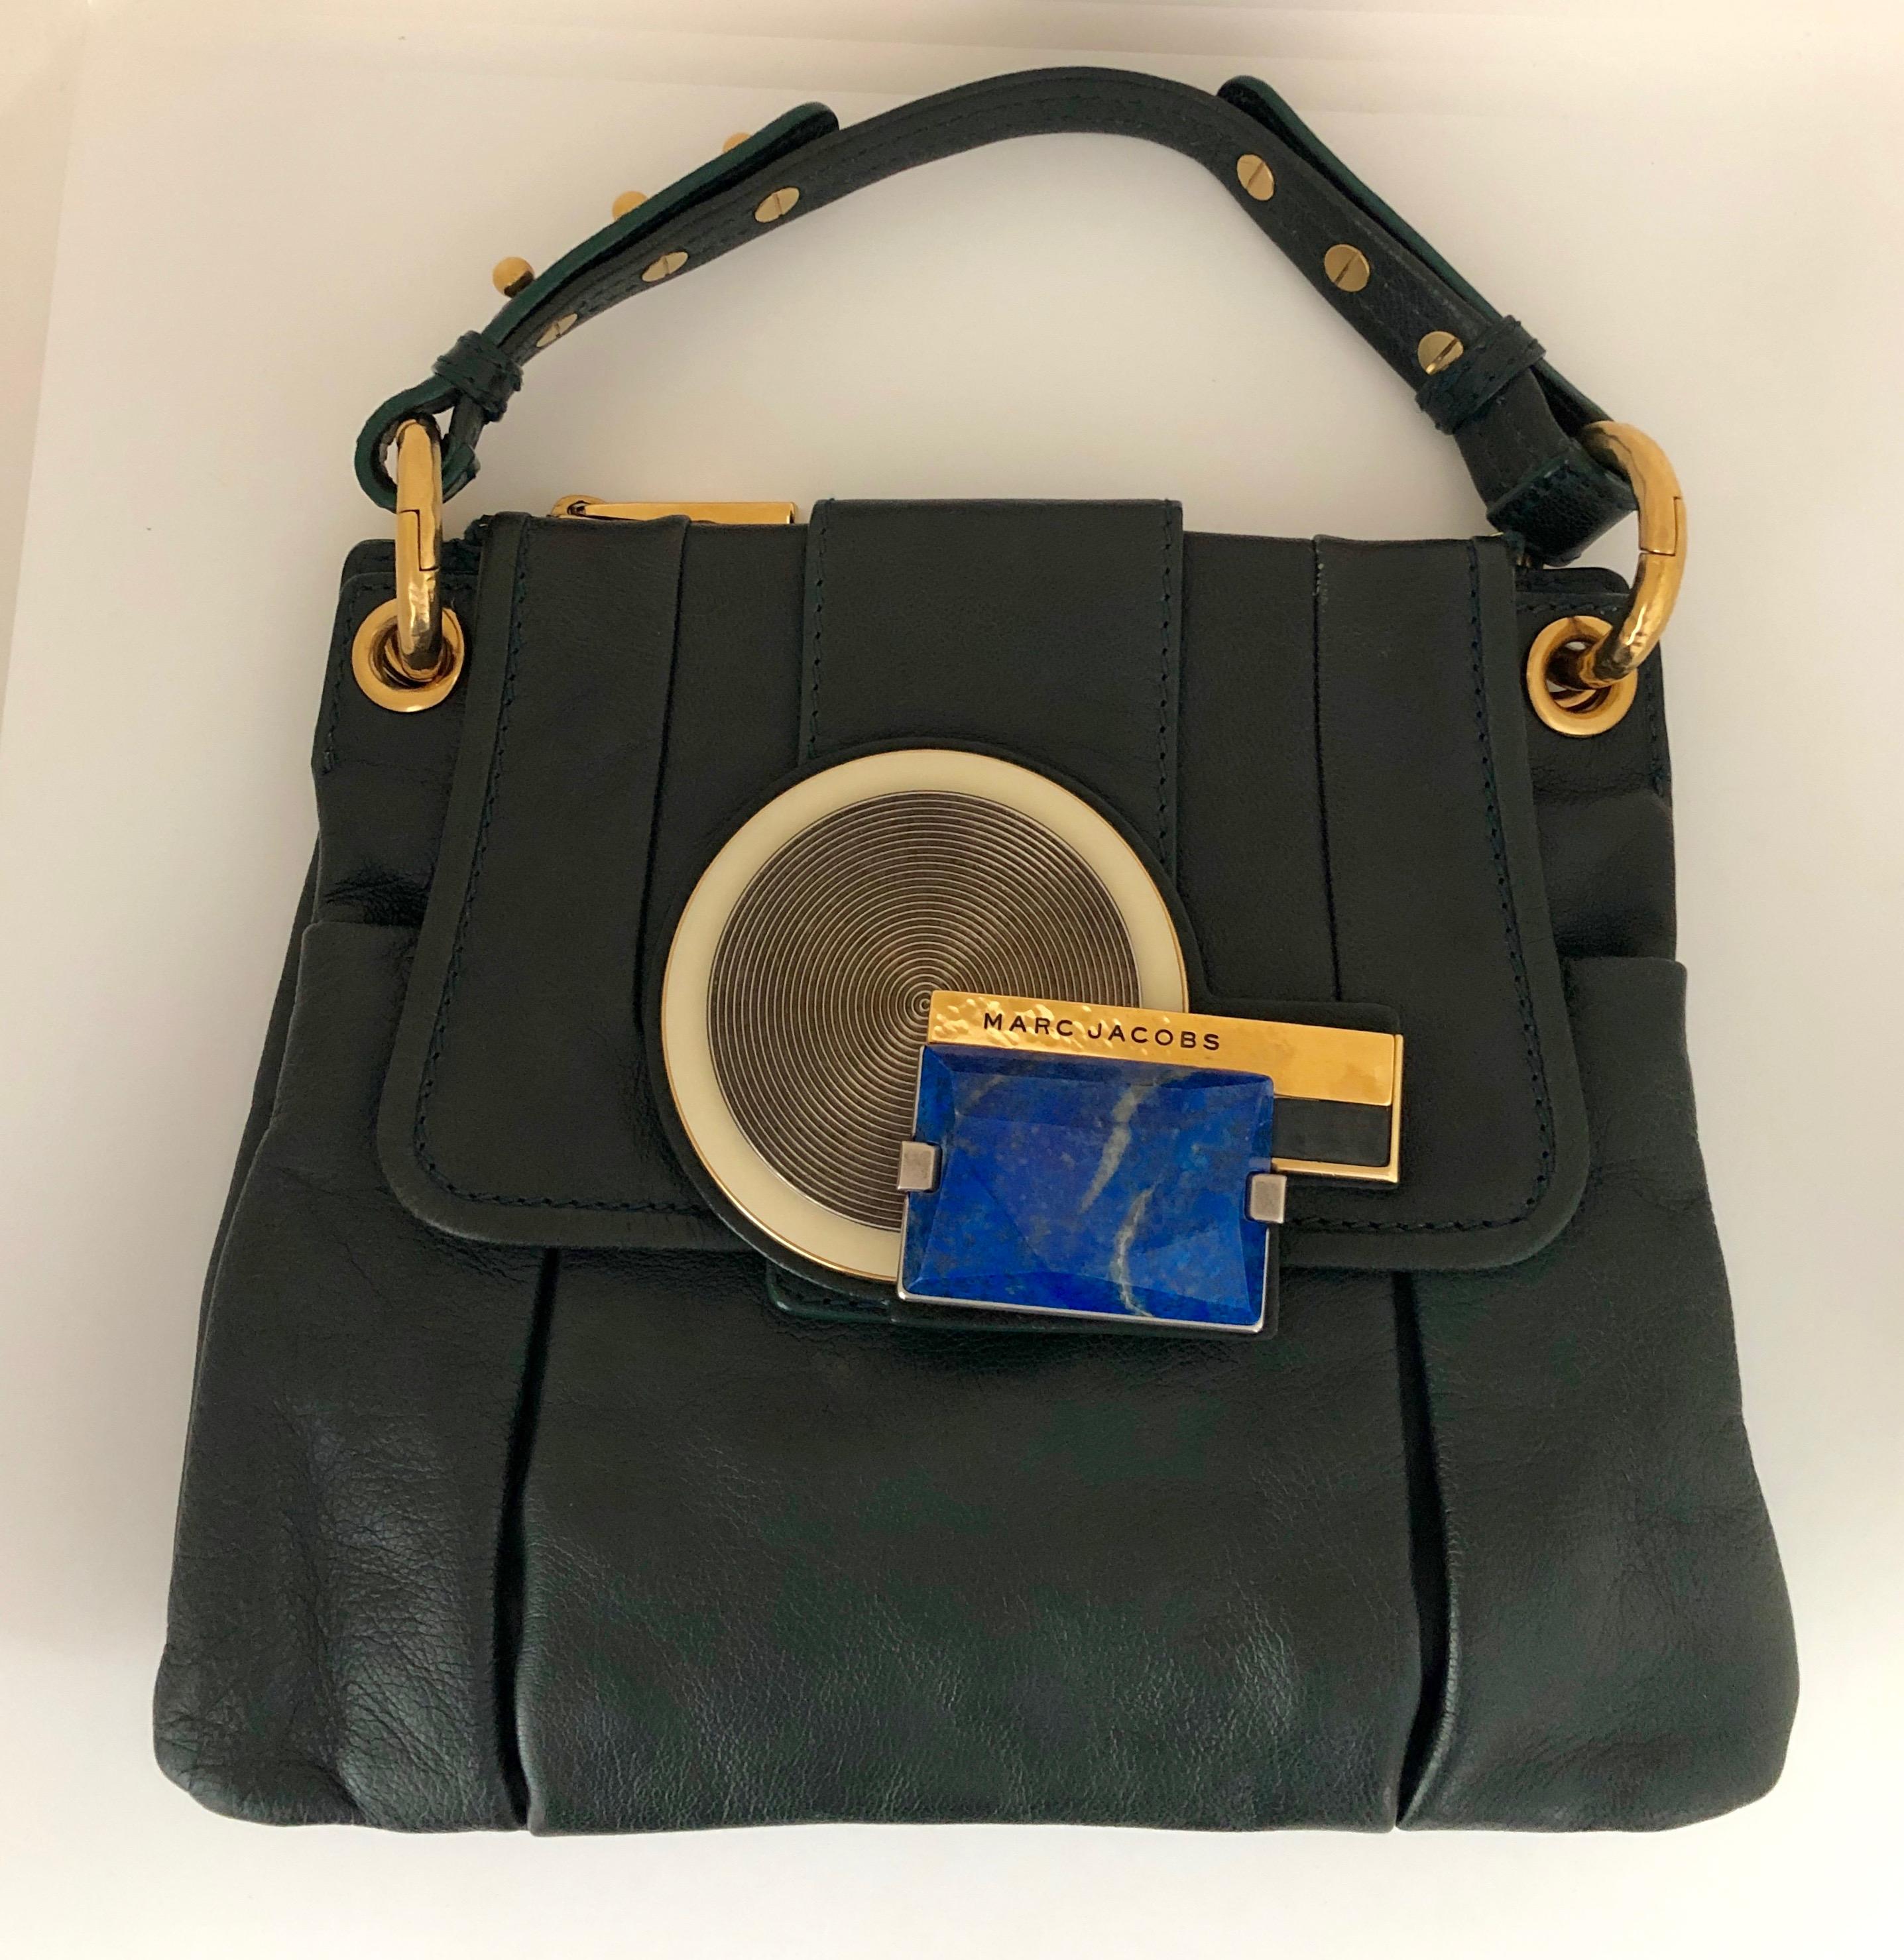 Black Marc Jacobs Green Leather Double Saddlebag w/ Top Handle & Metal / Jewel Accents